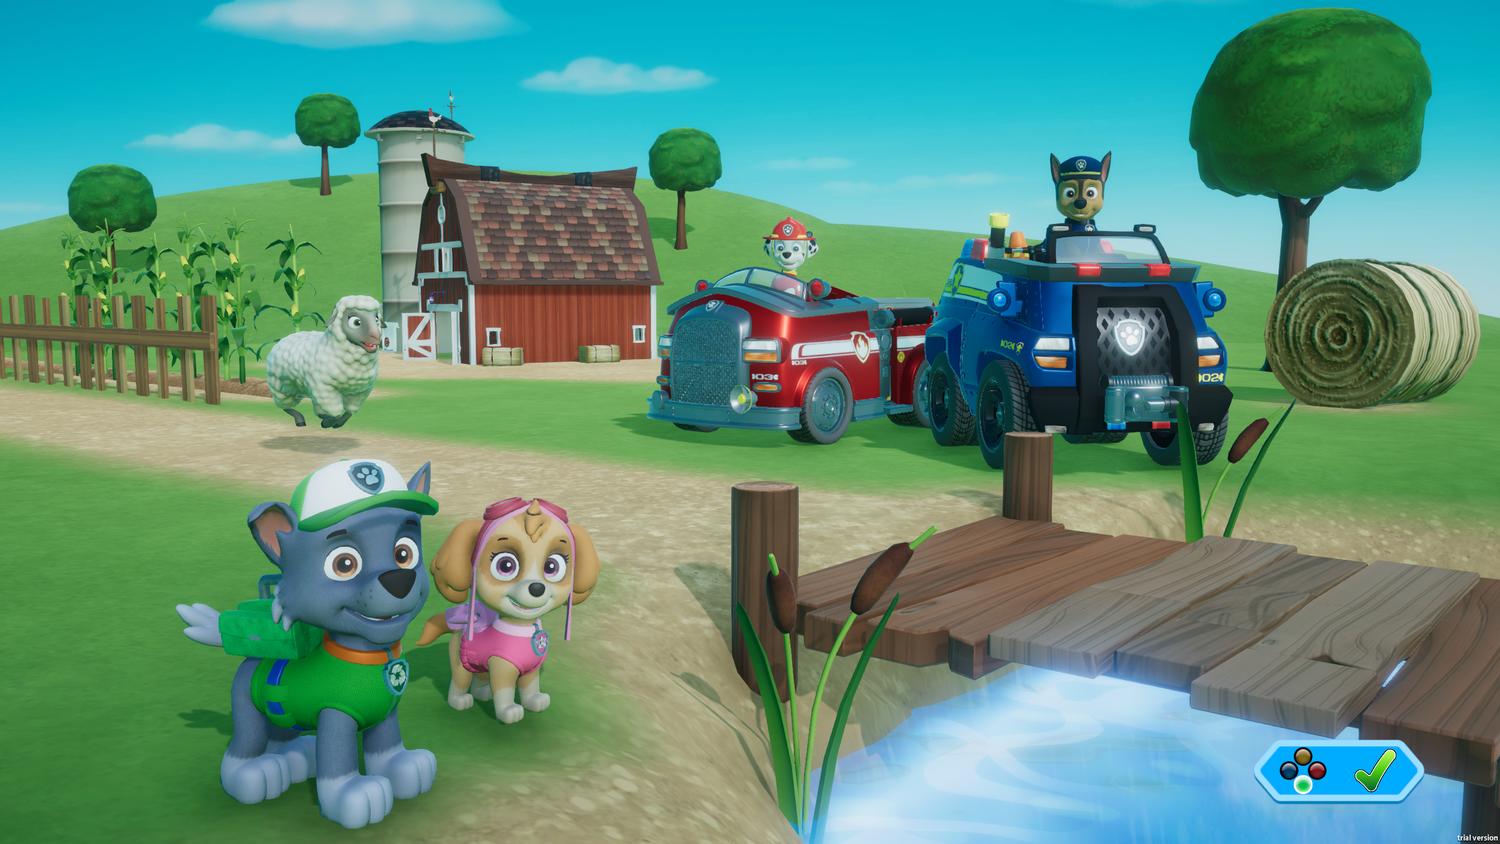 paw patrol game for xbox one